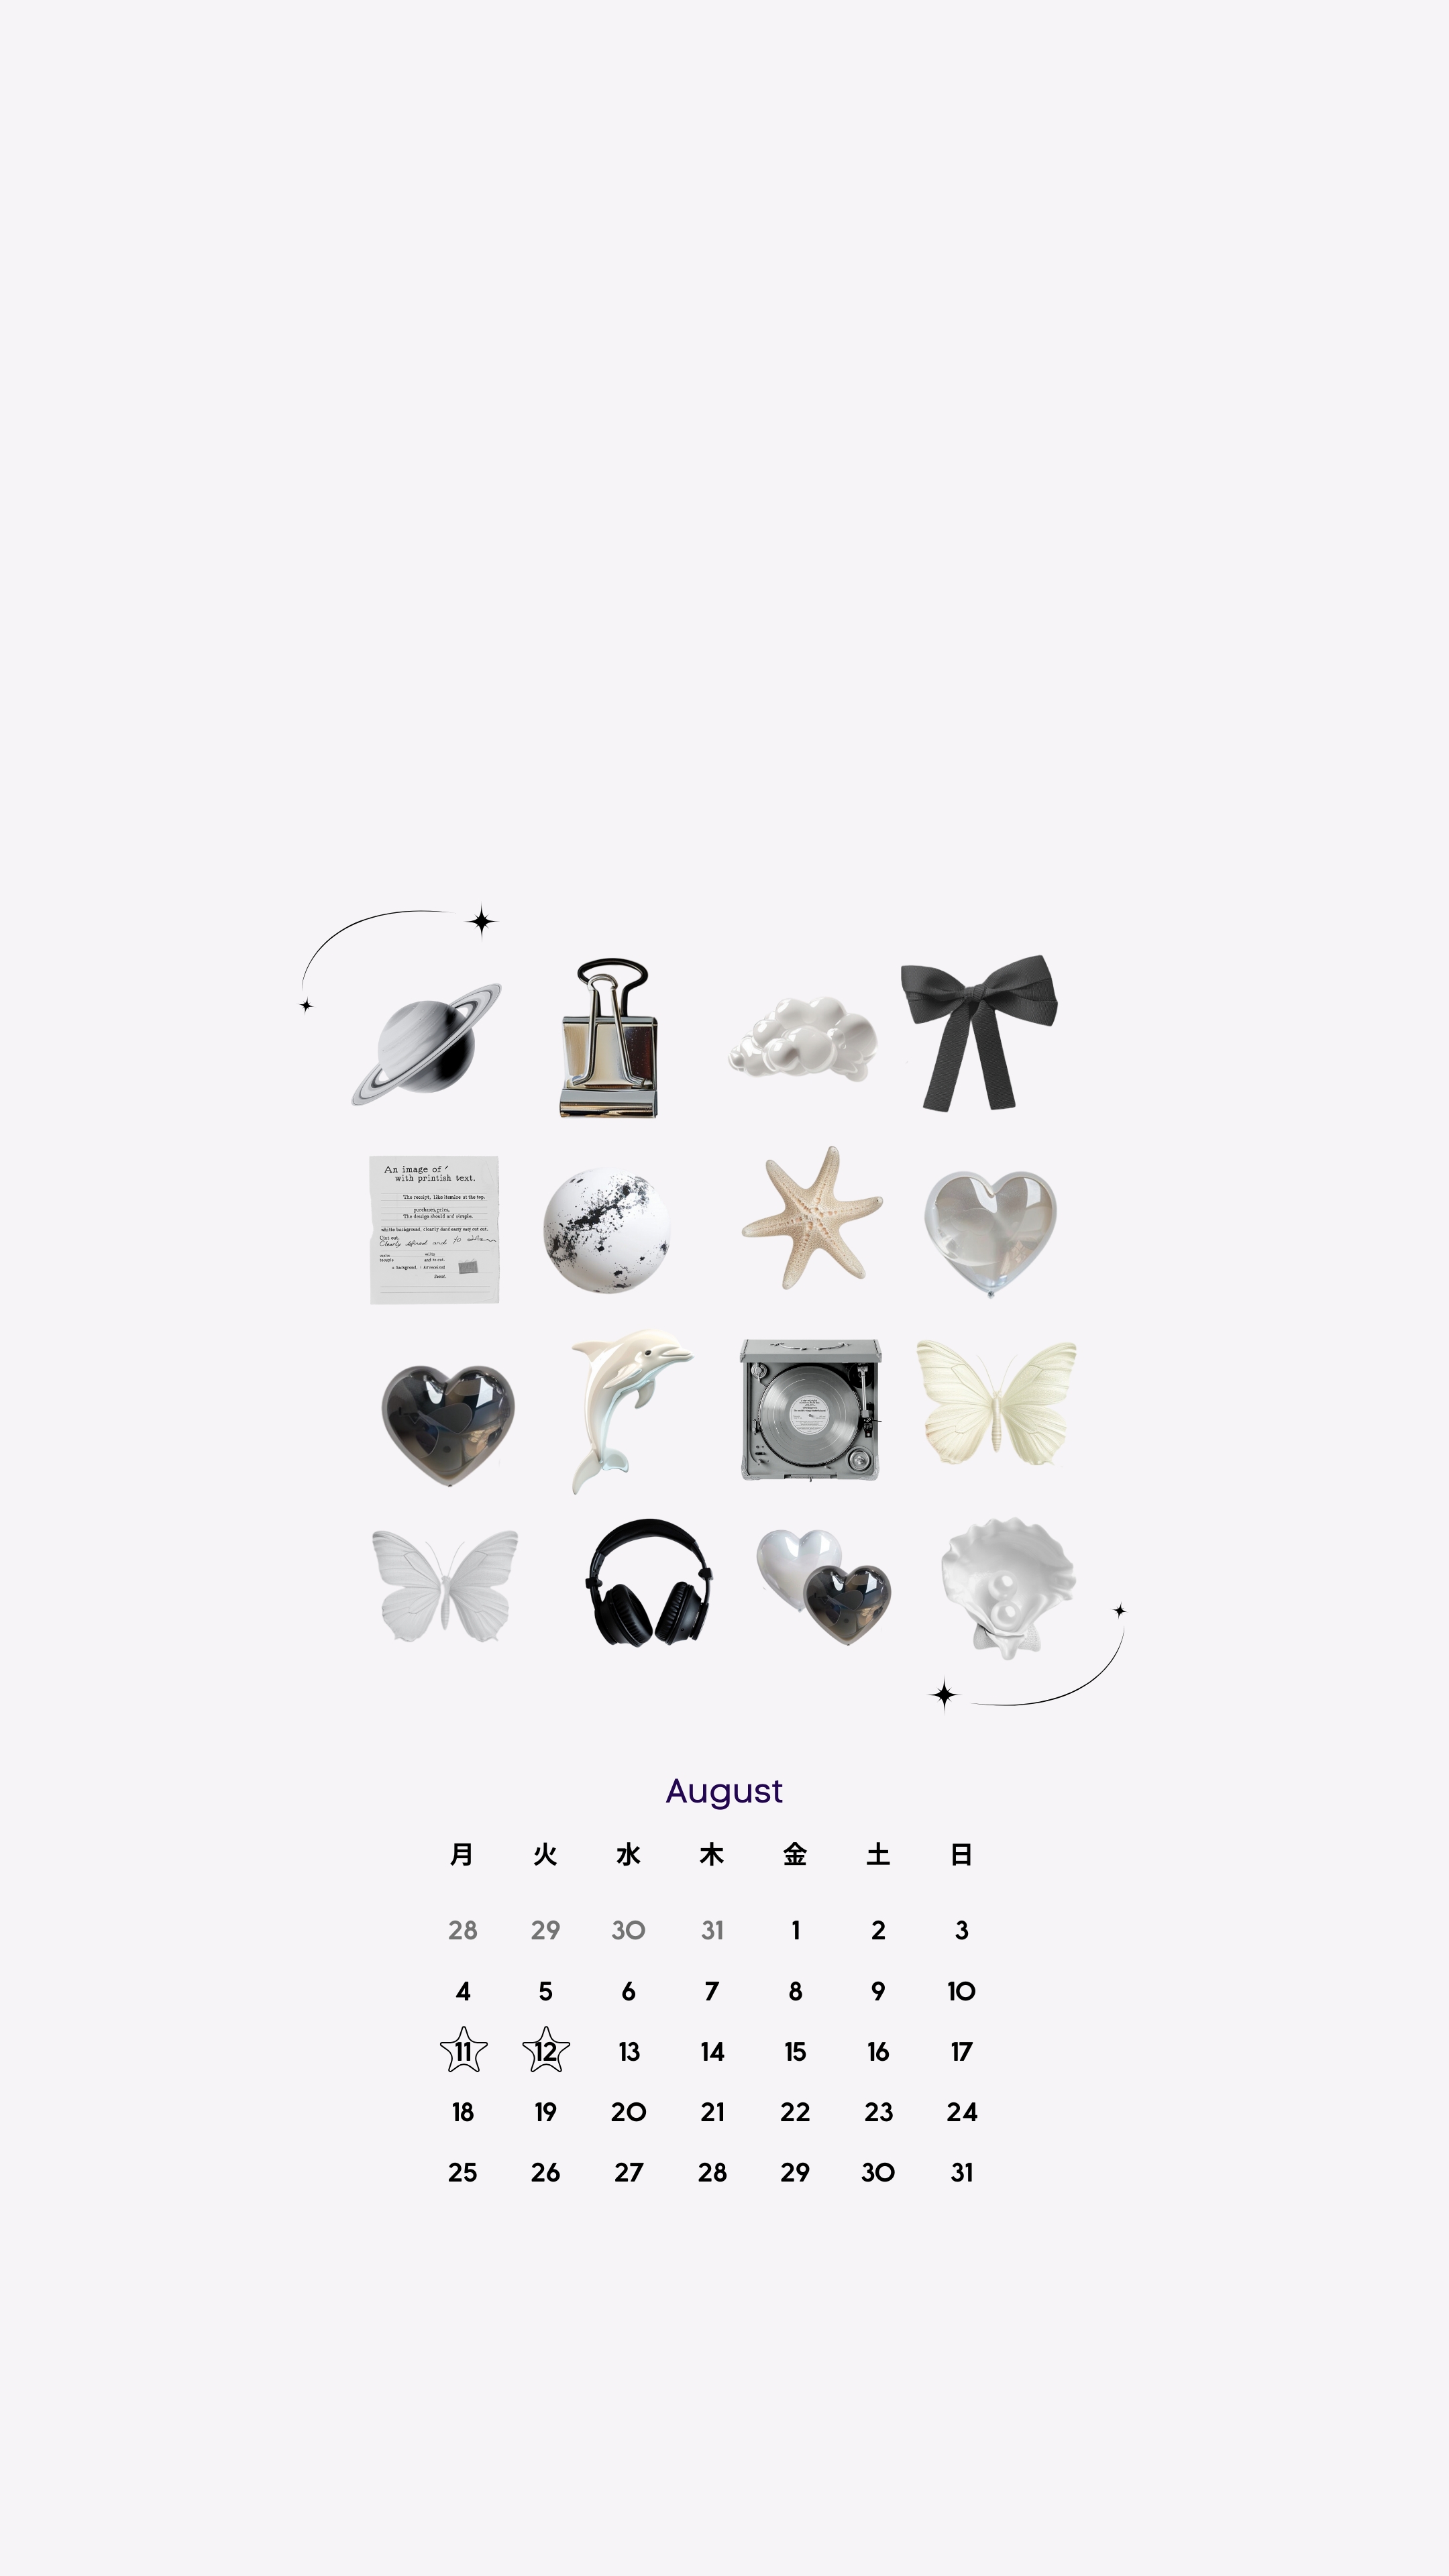 Simple and Elegant August Icons Design Tapeta[8a6faff9cb2649288108]